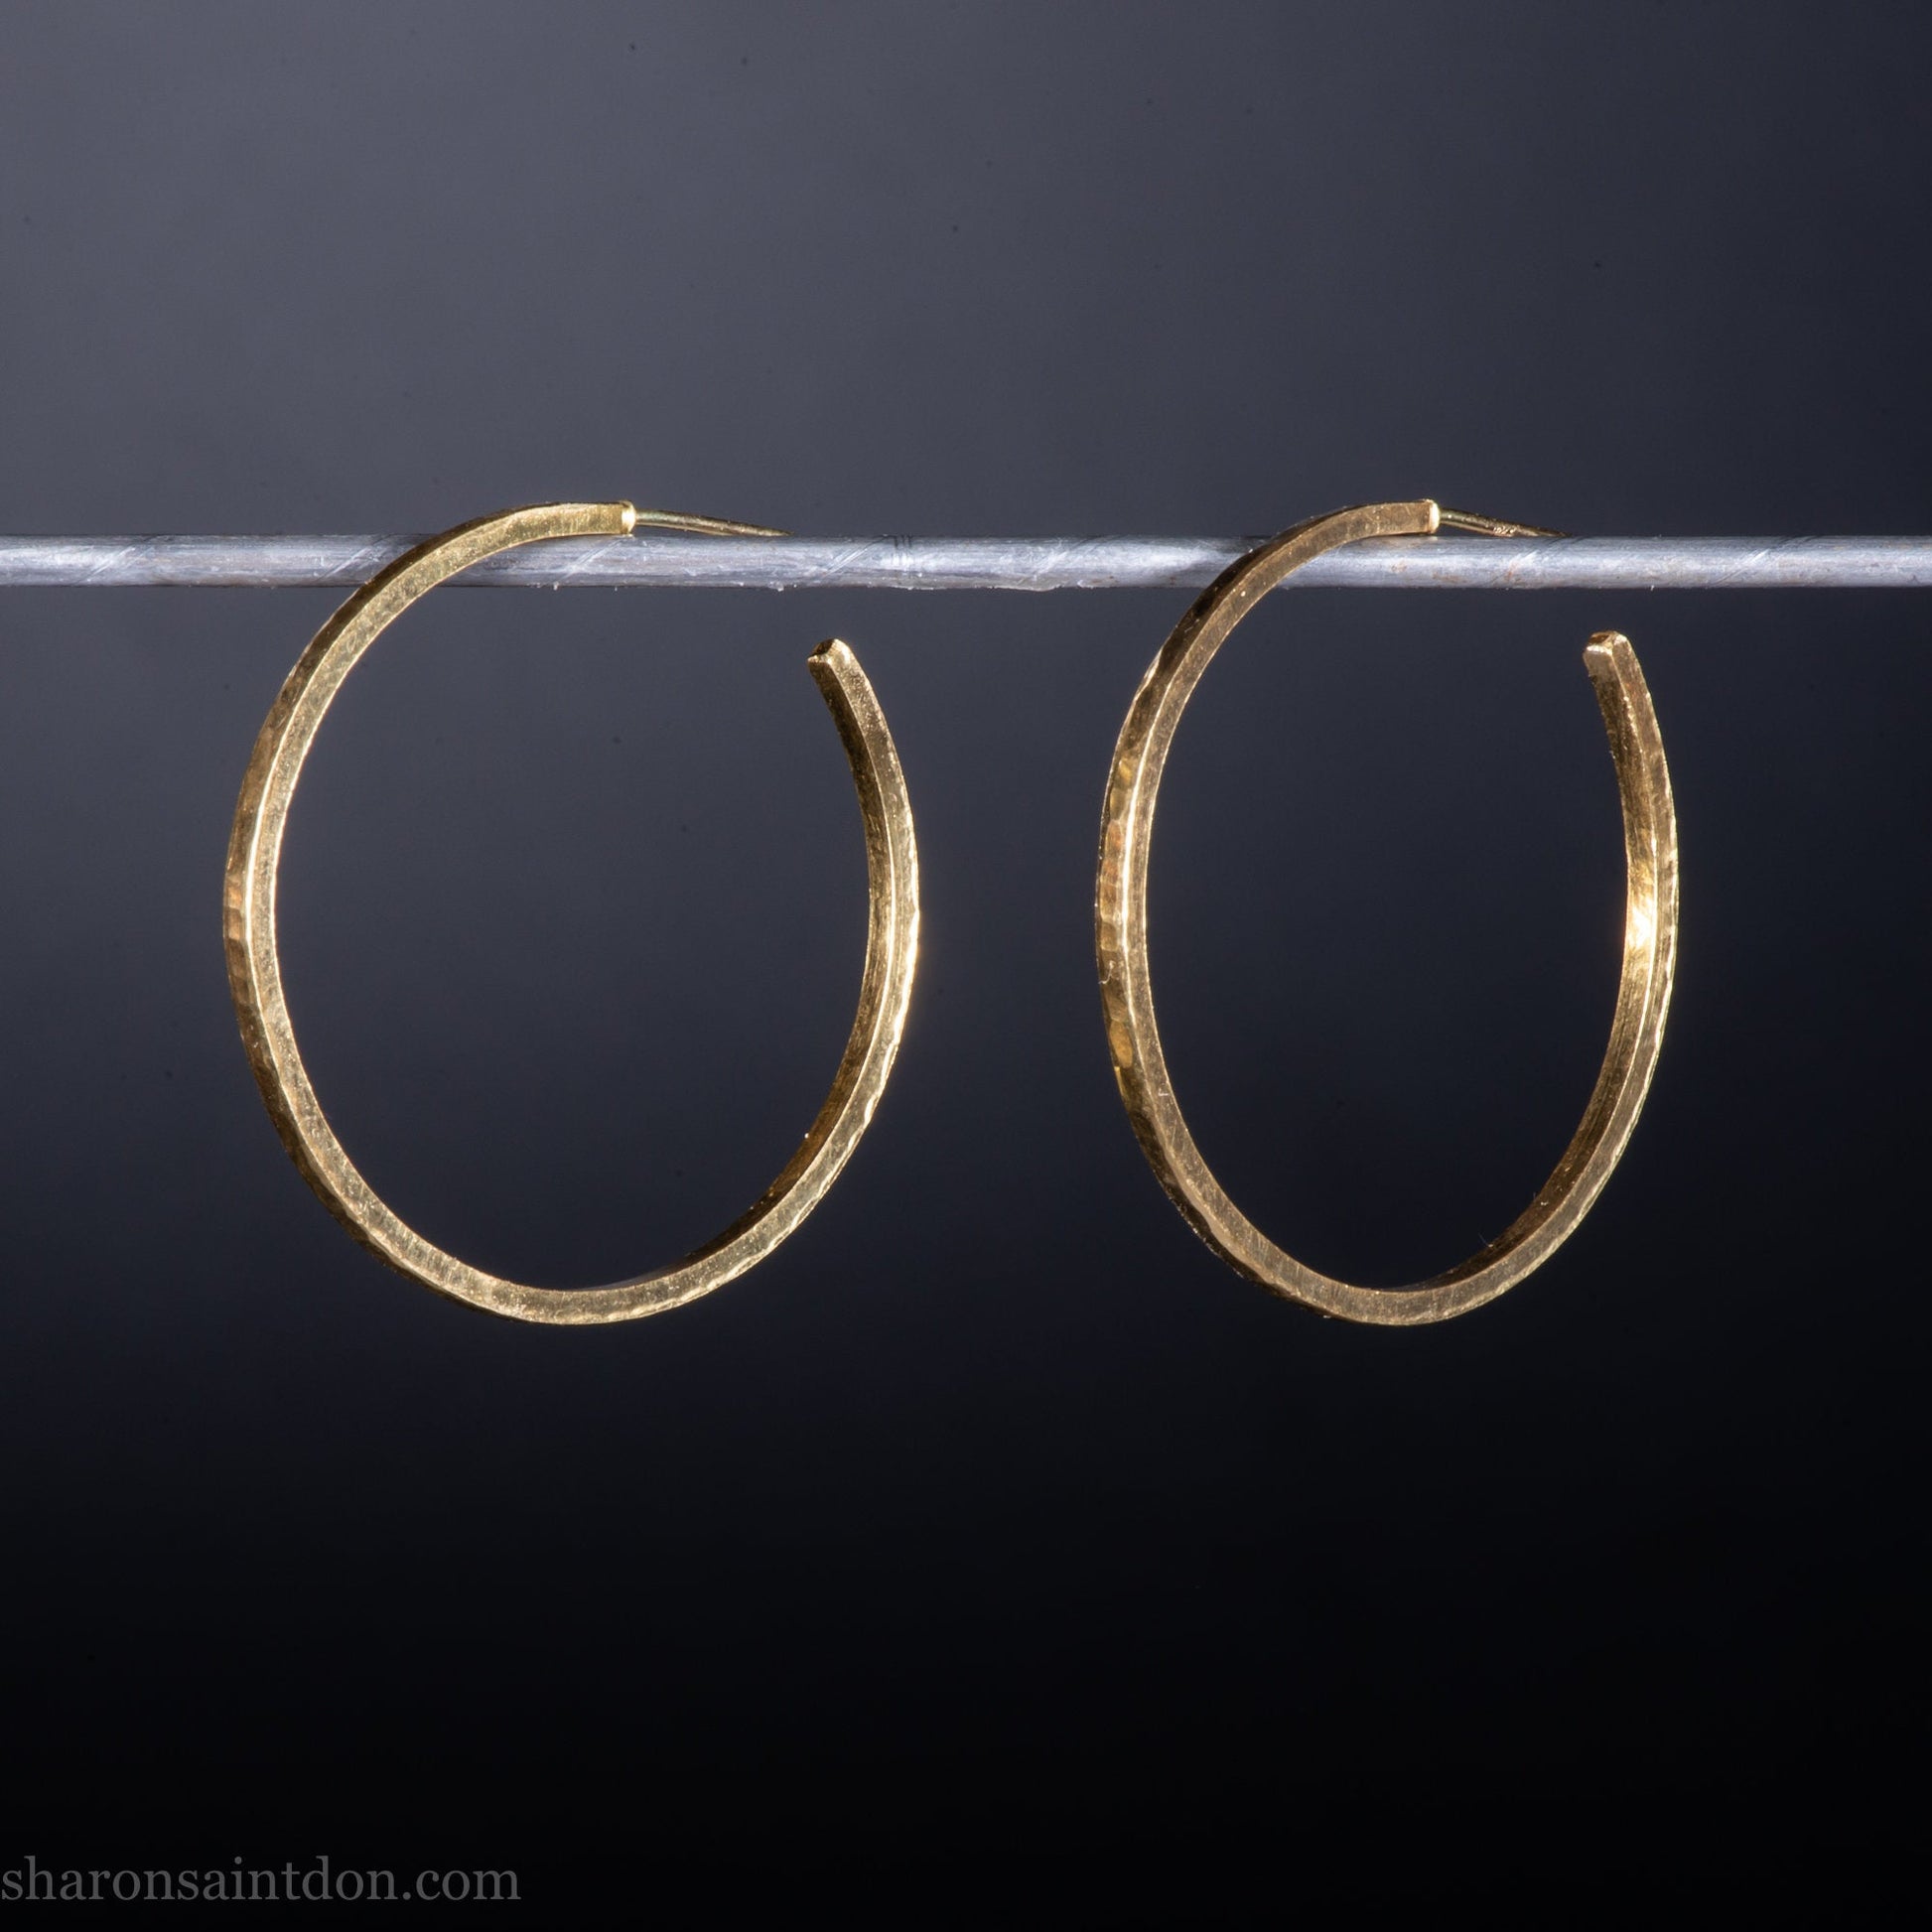 35mm solid 22k gold hoop earrings for women | Handmade, sustainable, eco- conscious gift for her